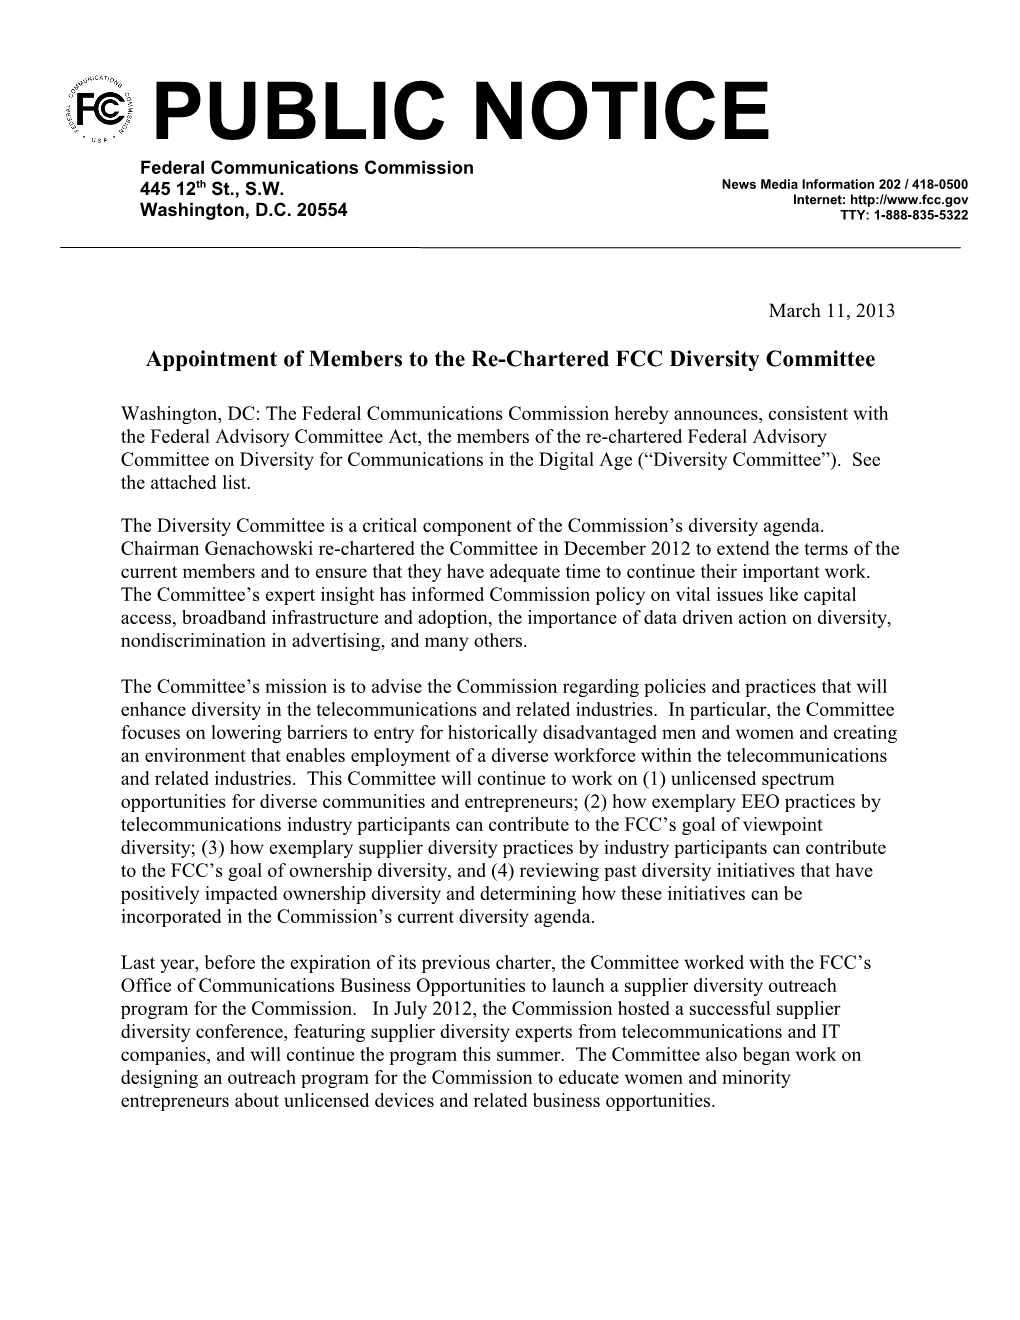 Appointment of Members to the Re-Chartered FCC Diversity Committee